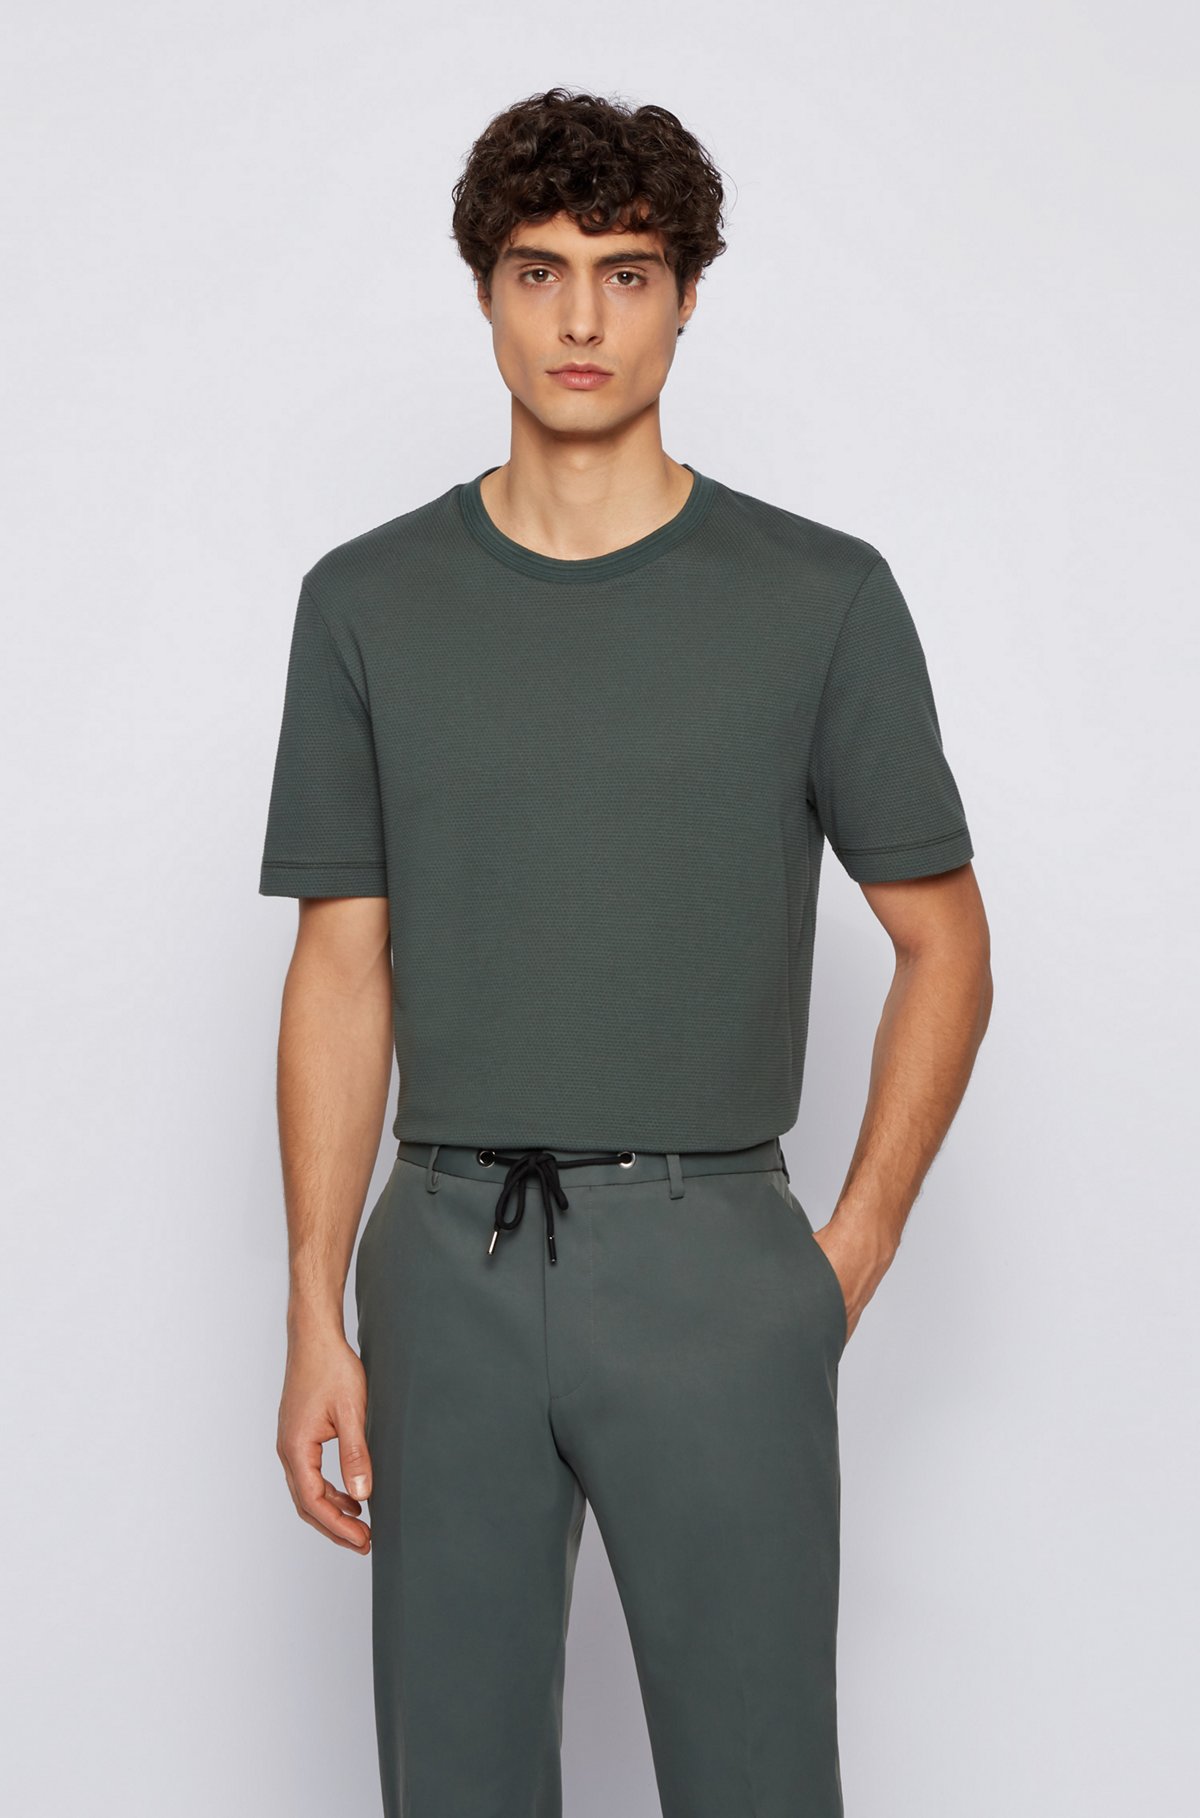 Cotton-blend T-shirt with bubble-jacquard structure, Dark Green